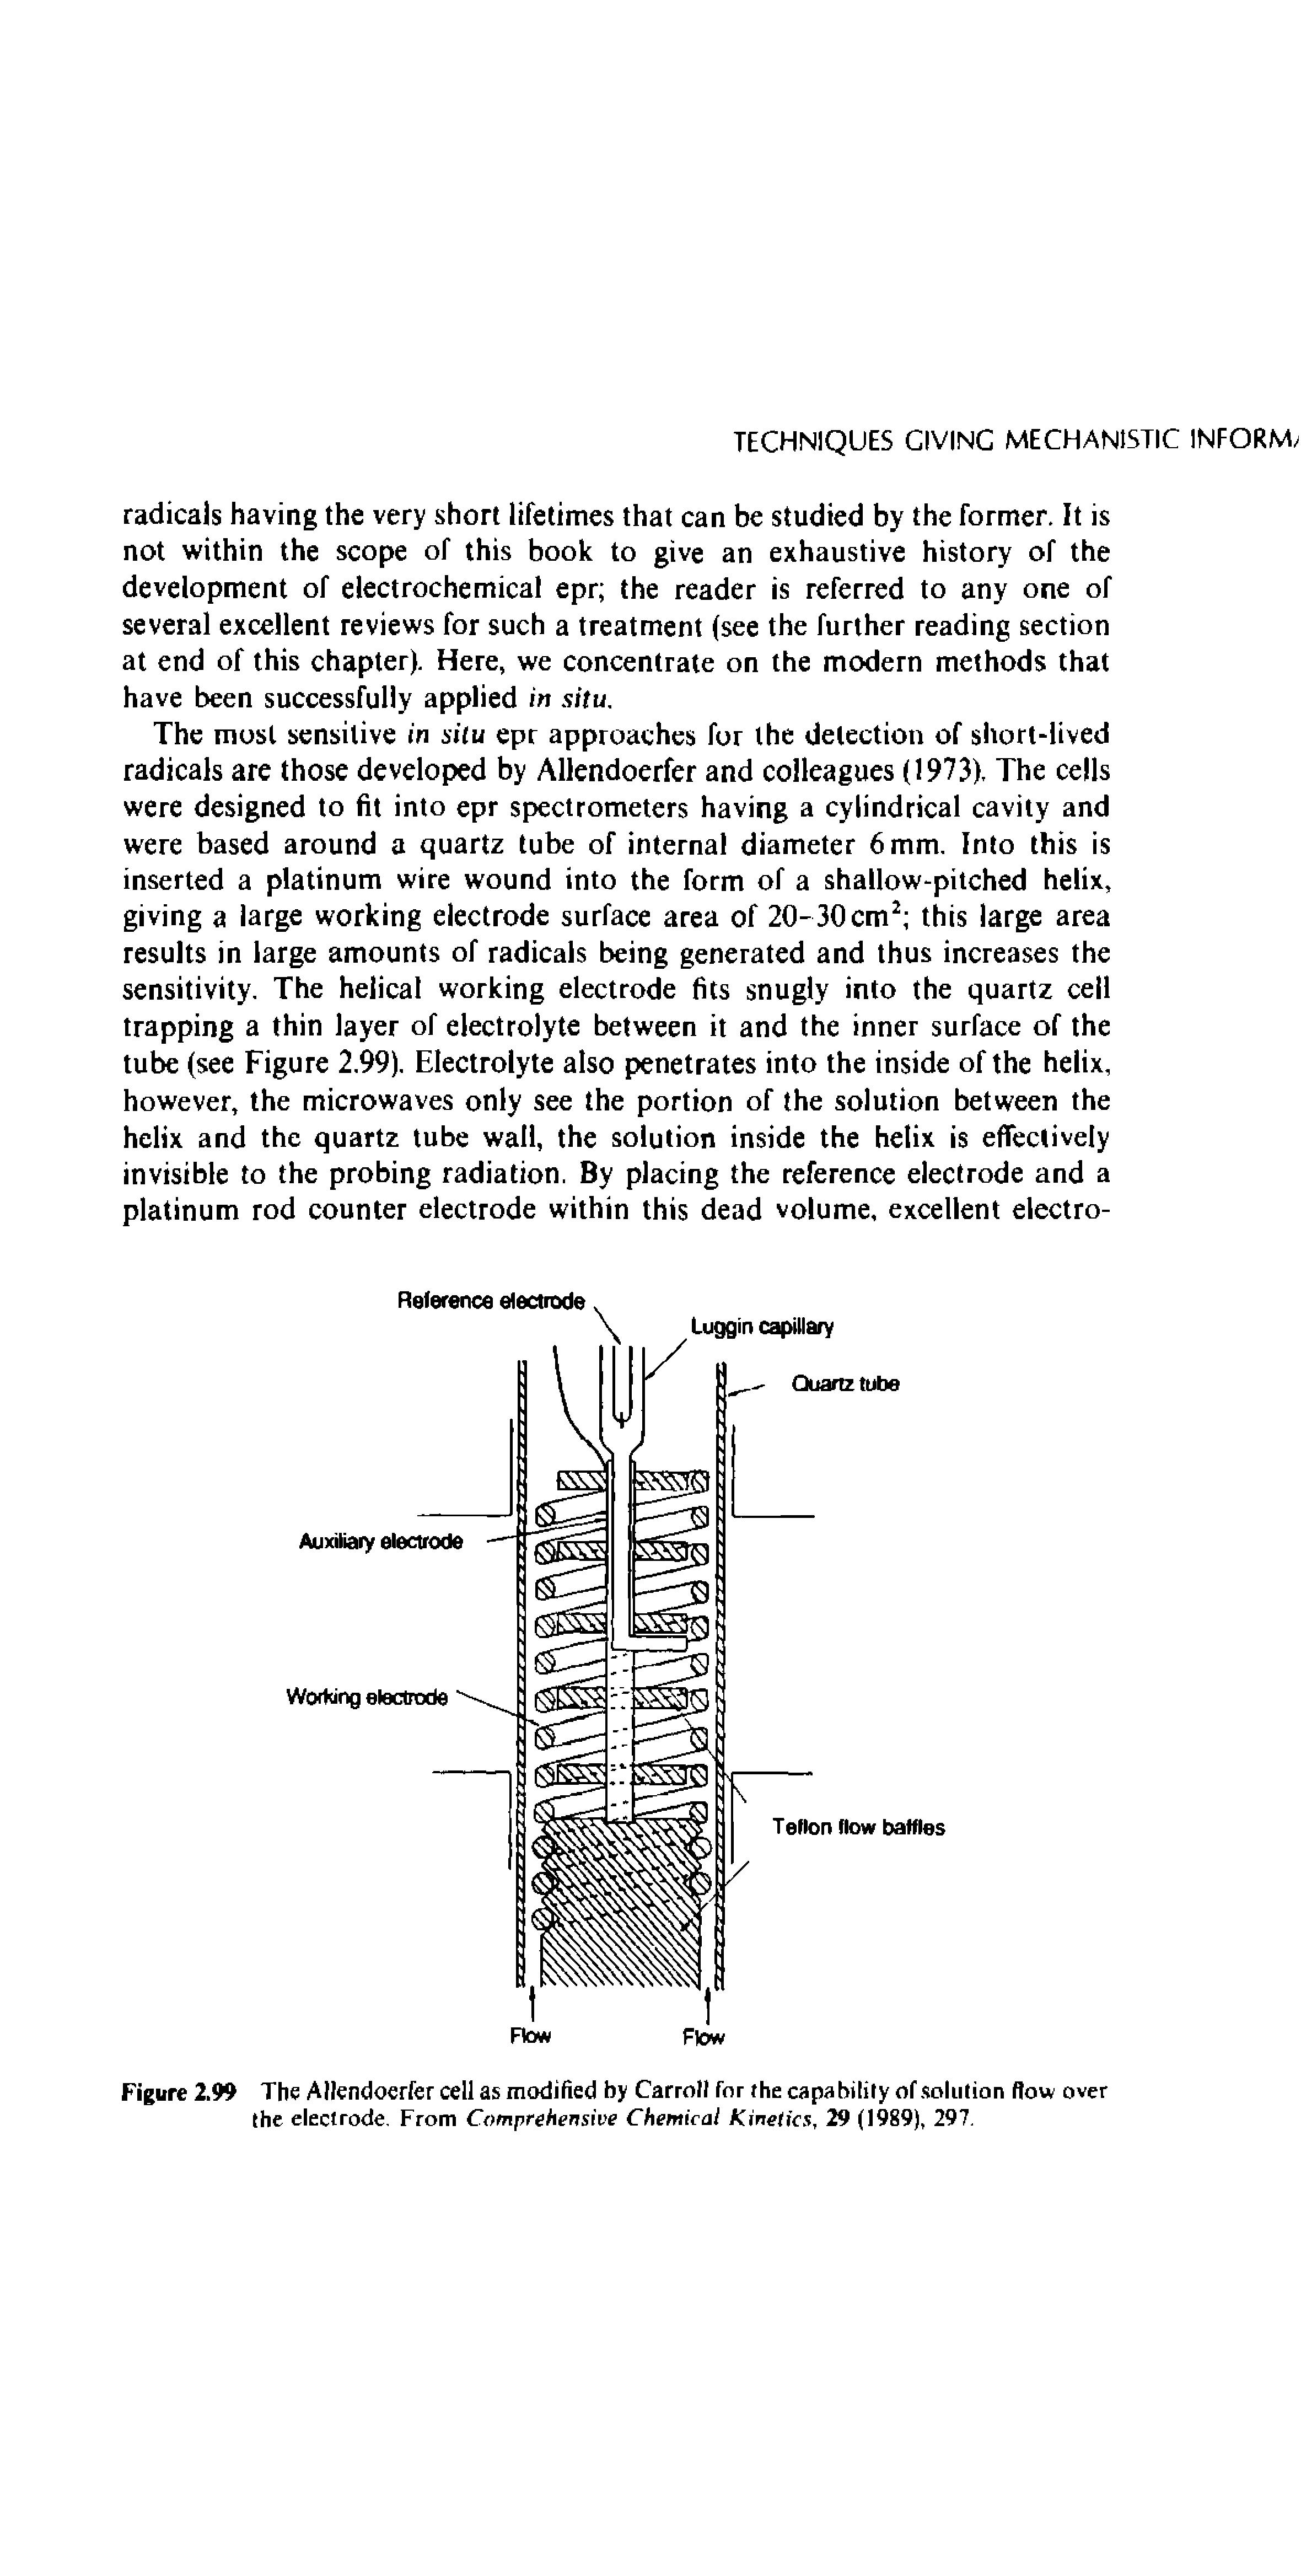 Figure 2.99 The Allendoerfer cell as modified by Carroll for the capability of solution flow over the electrode. From Comprehensive Chemical Kinetics, 29 (1989), 297.